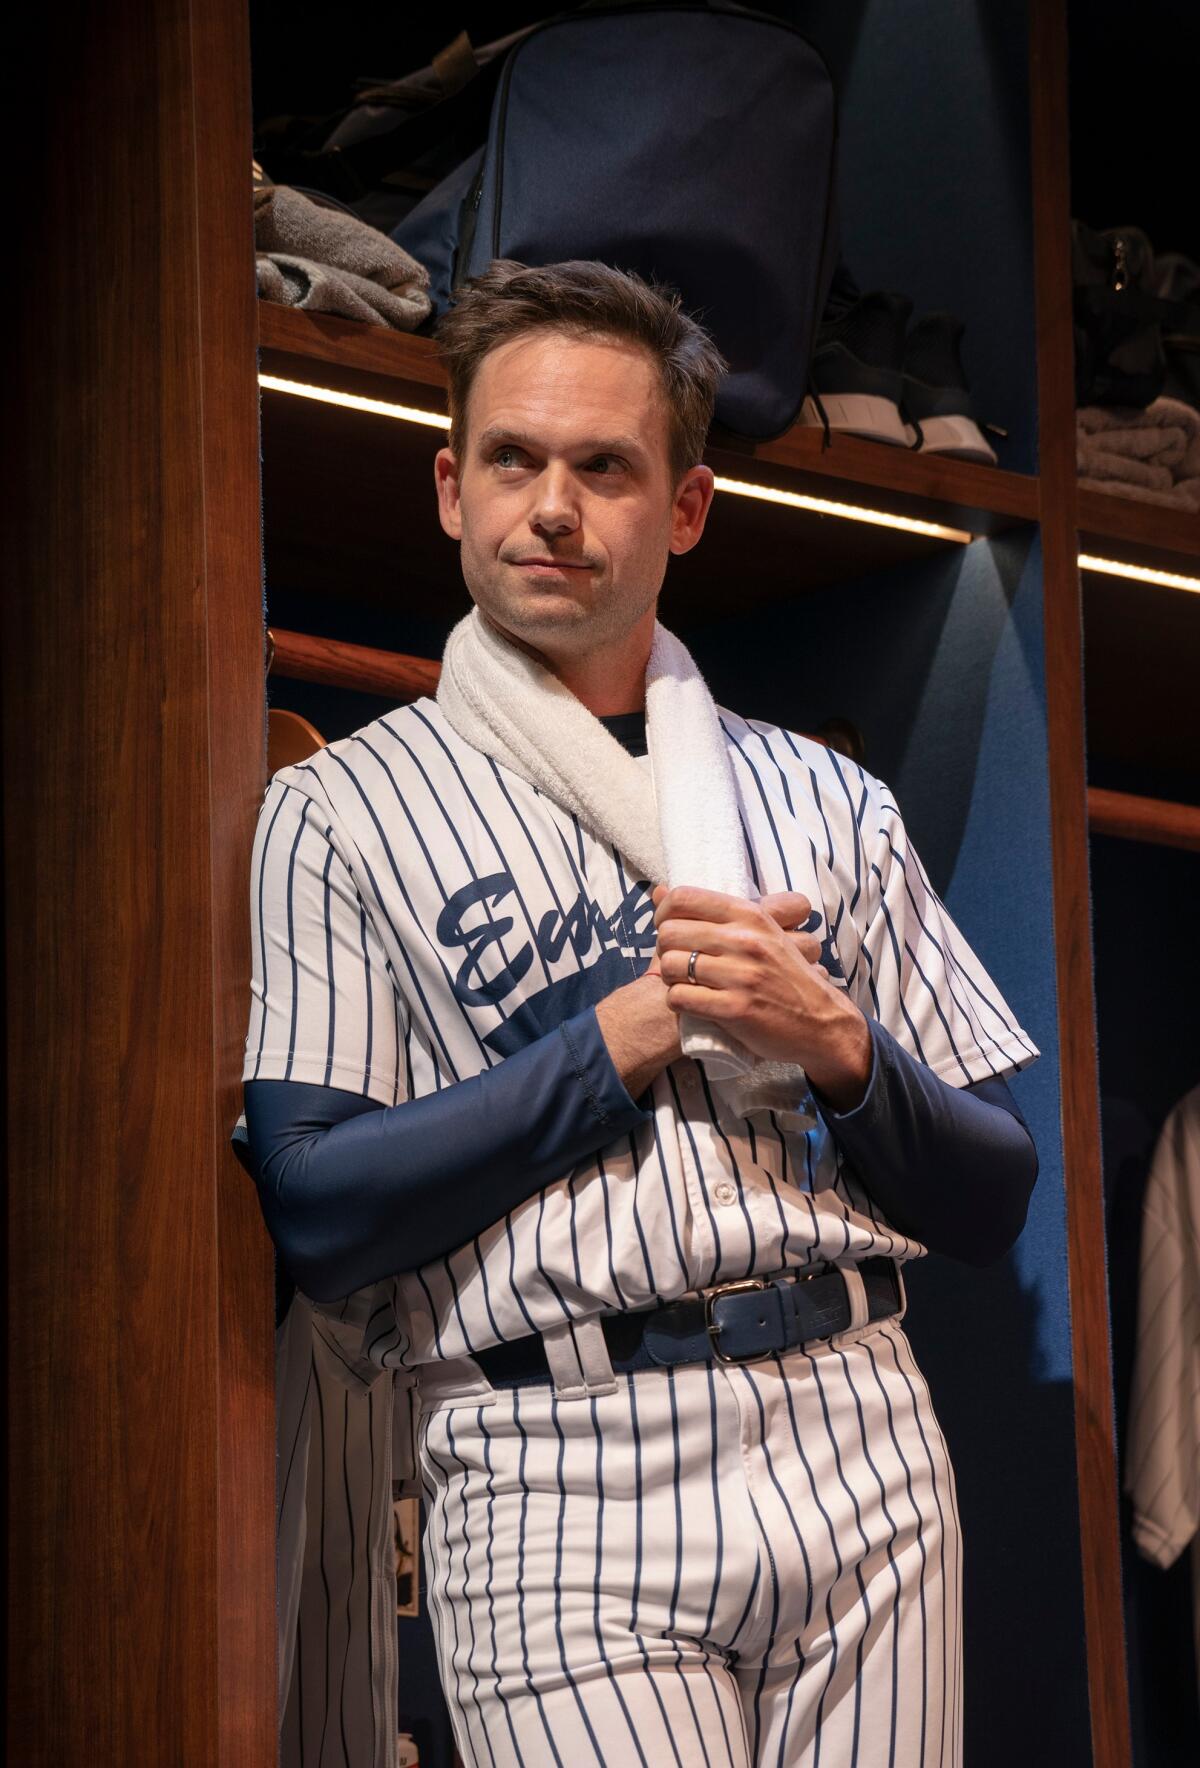 A man in a baseball uniform with a towel around his neck leans against a locker room wall.